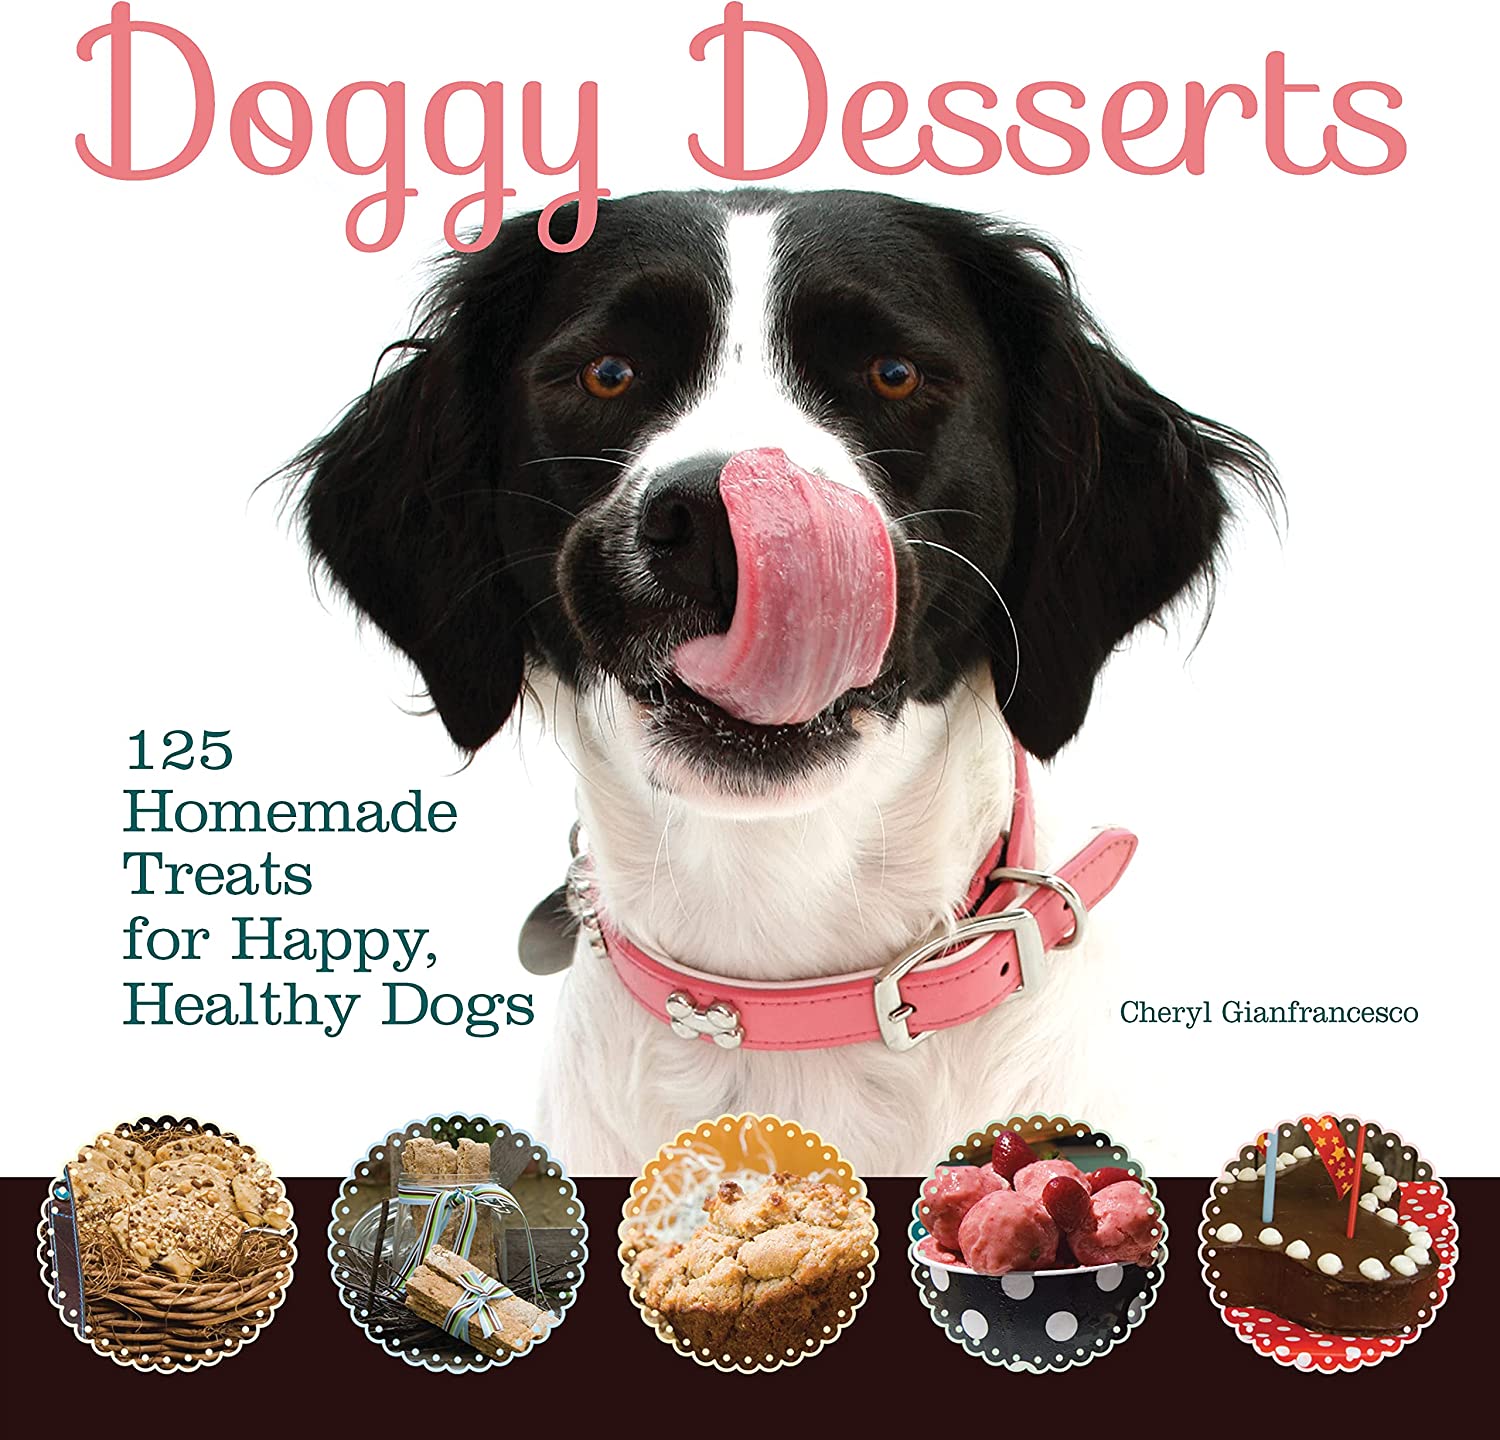 Doggy Desserts: 125 Homemade Treats for Happy, Healthy Dogs (CompanionHouse Books) Easy & Nutritious Canine-Friendly Recipes for Cookies, Bars, Biscotti, Biscuits, Cakes, Muffins, and Frozen Desserts